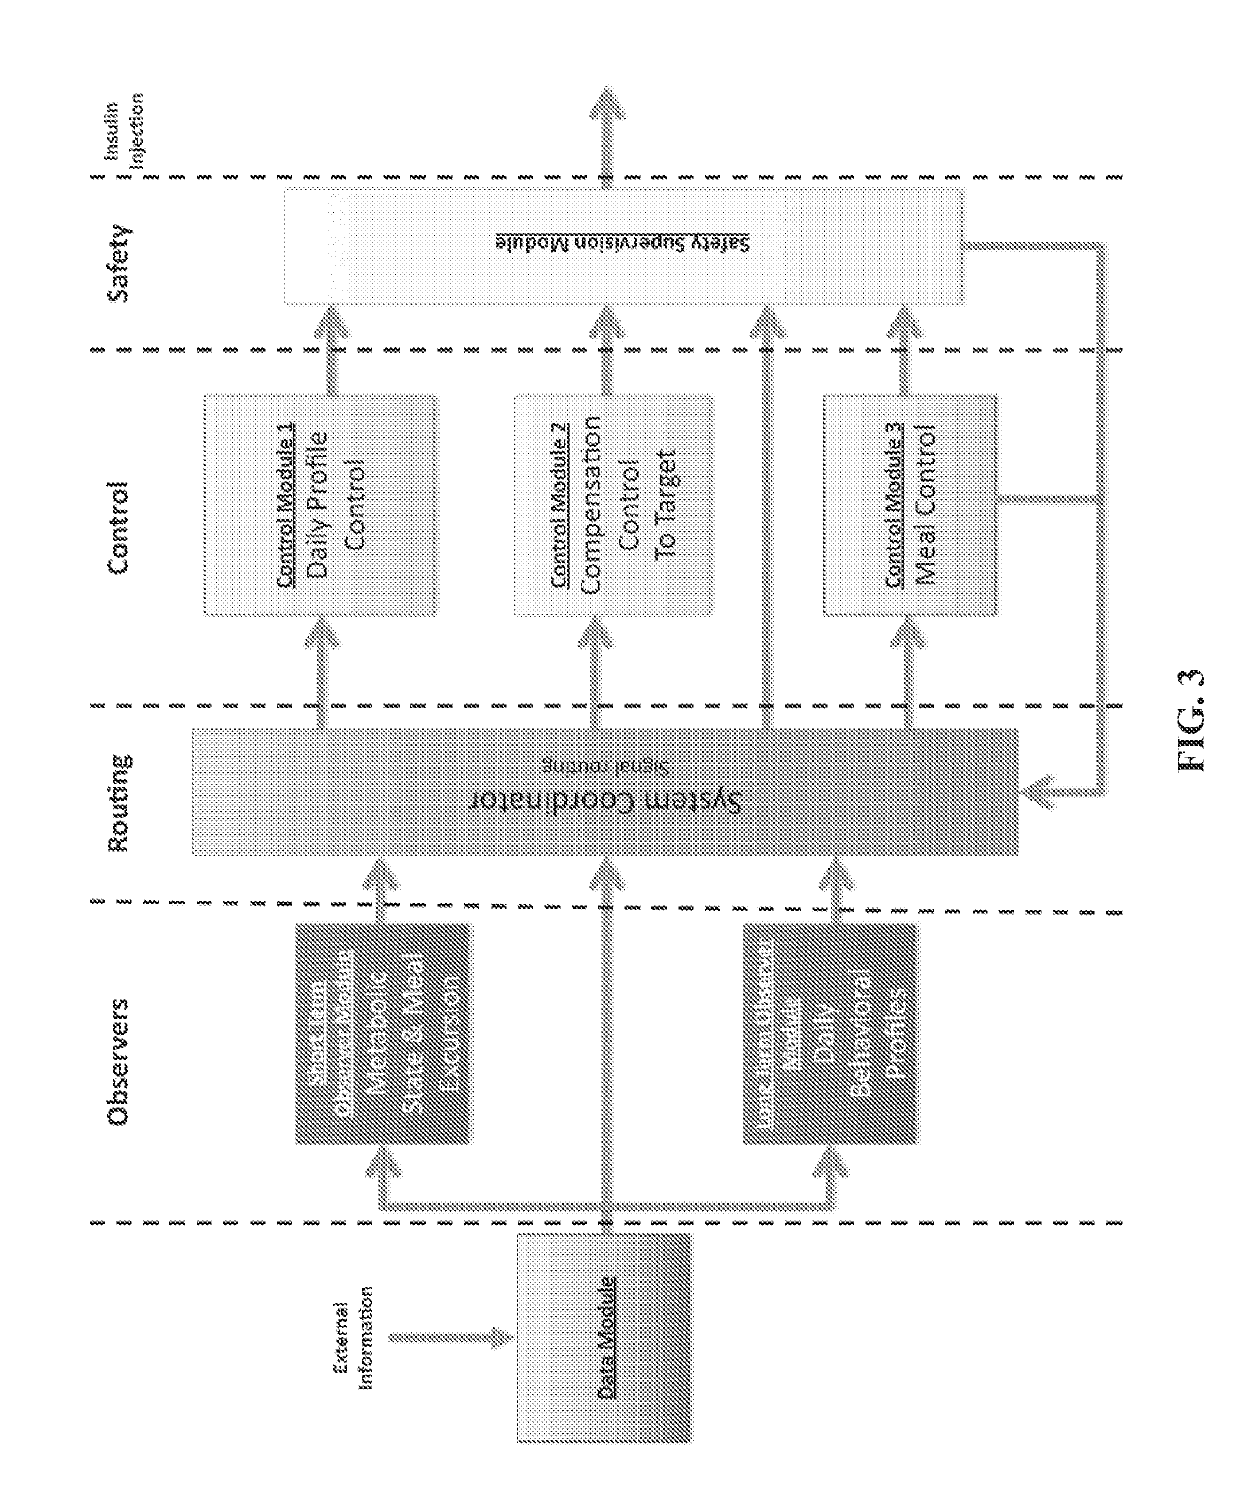 System coordinator and modular architecture for open-loop and closed-loop control of diabetes